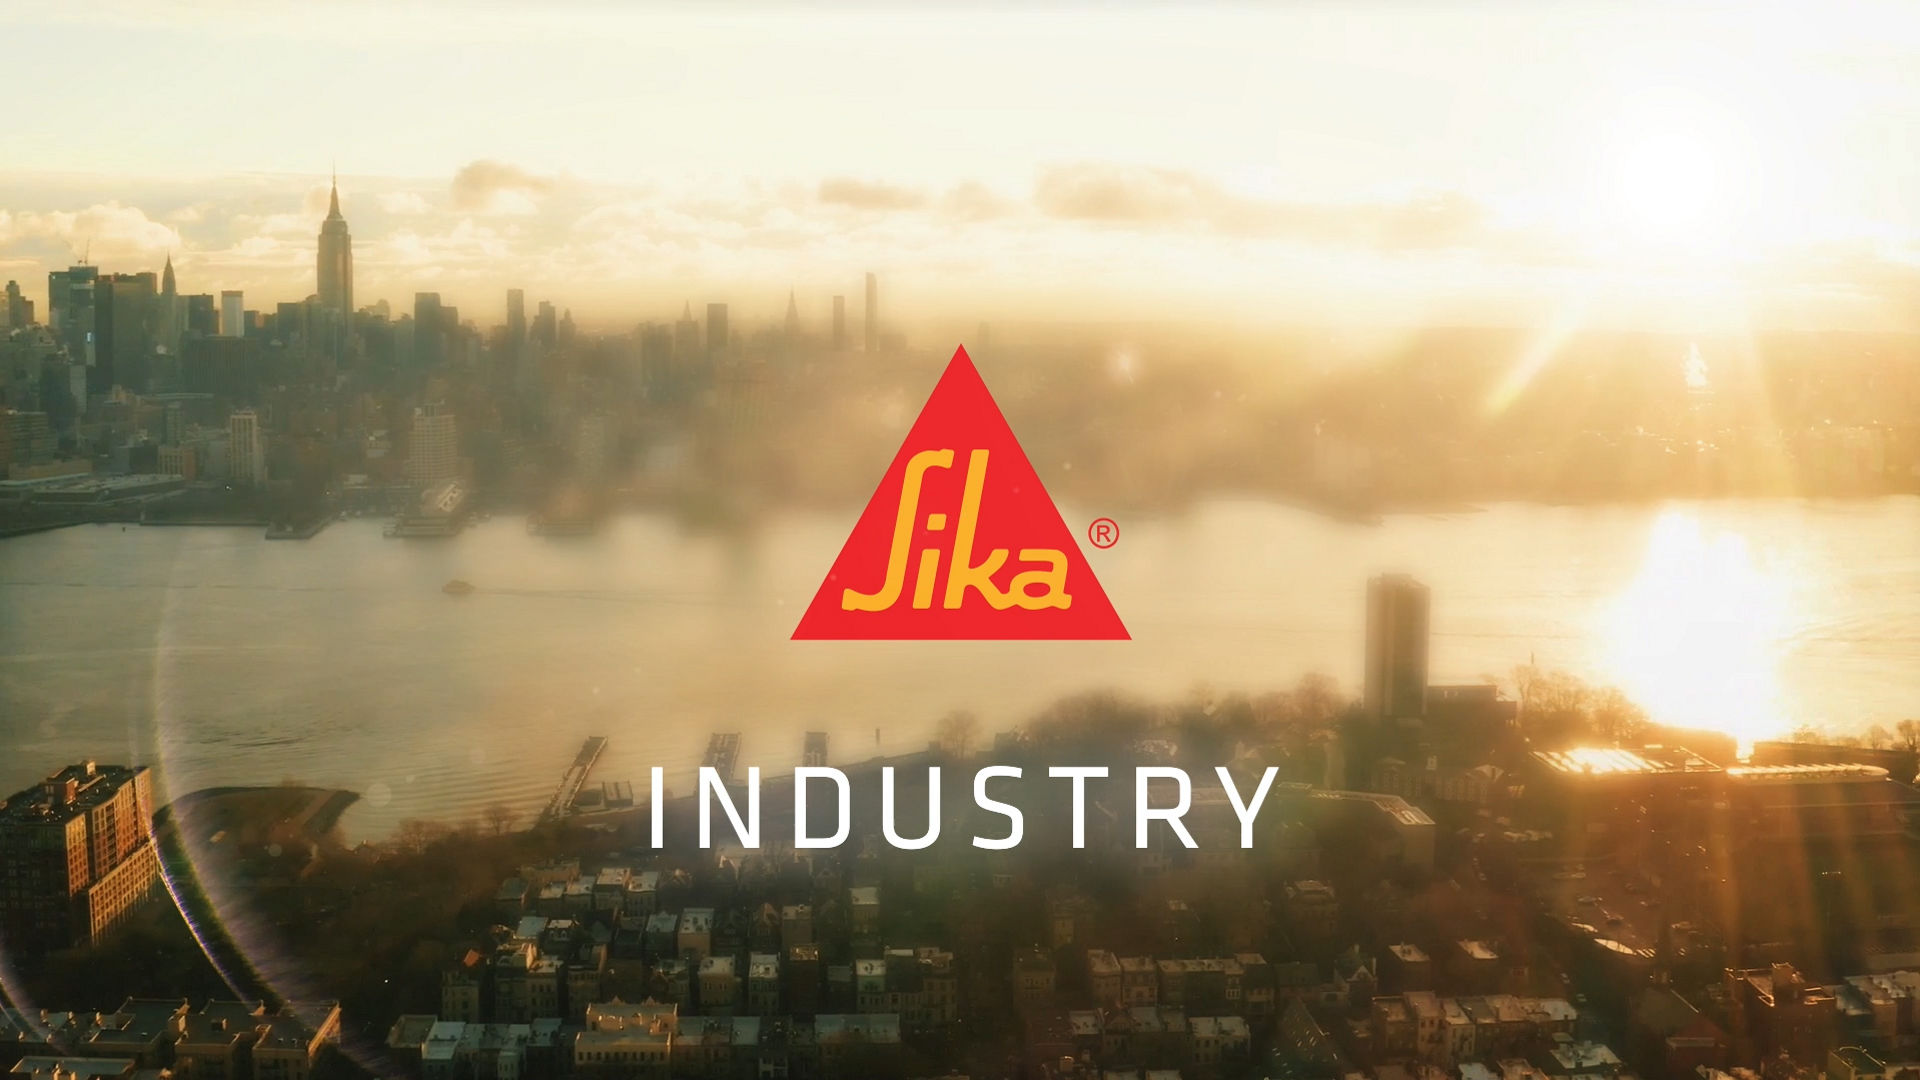 Sika Industry Anthem Page Header Image